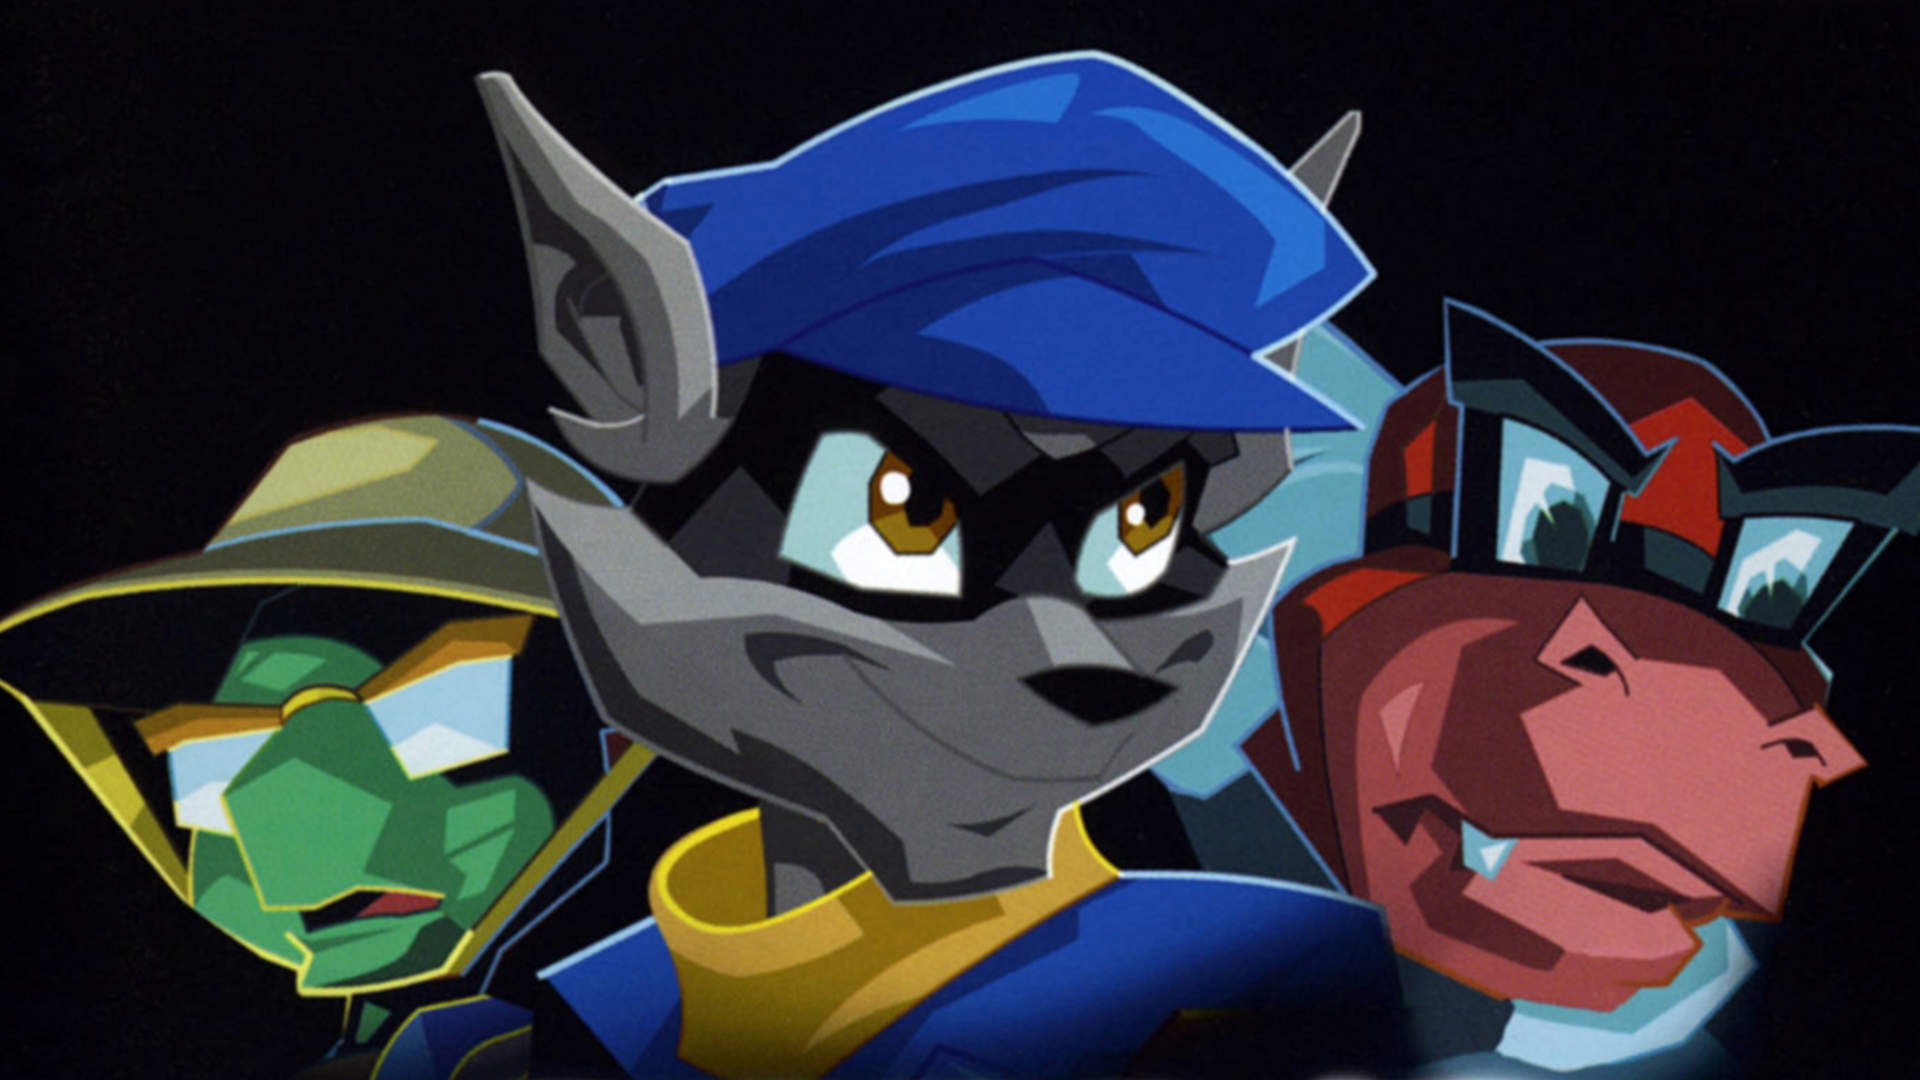 1920x1080 Sucker Punch Has Some Bad News for inFamous and Sly Cooper Fans